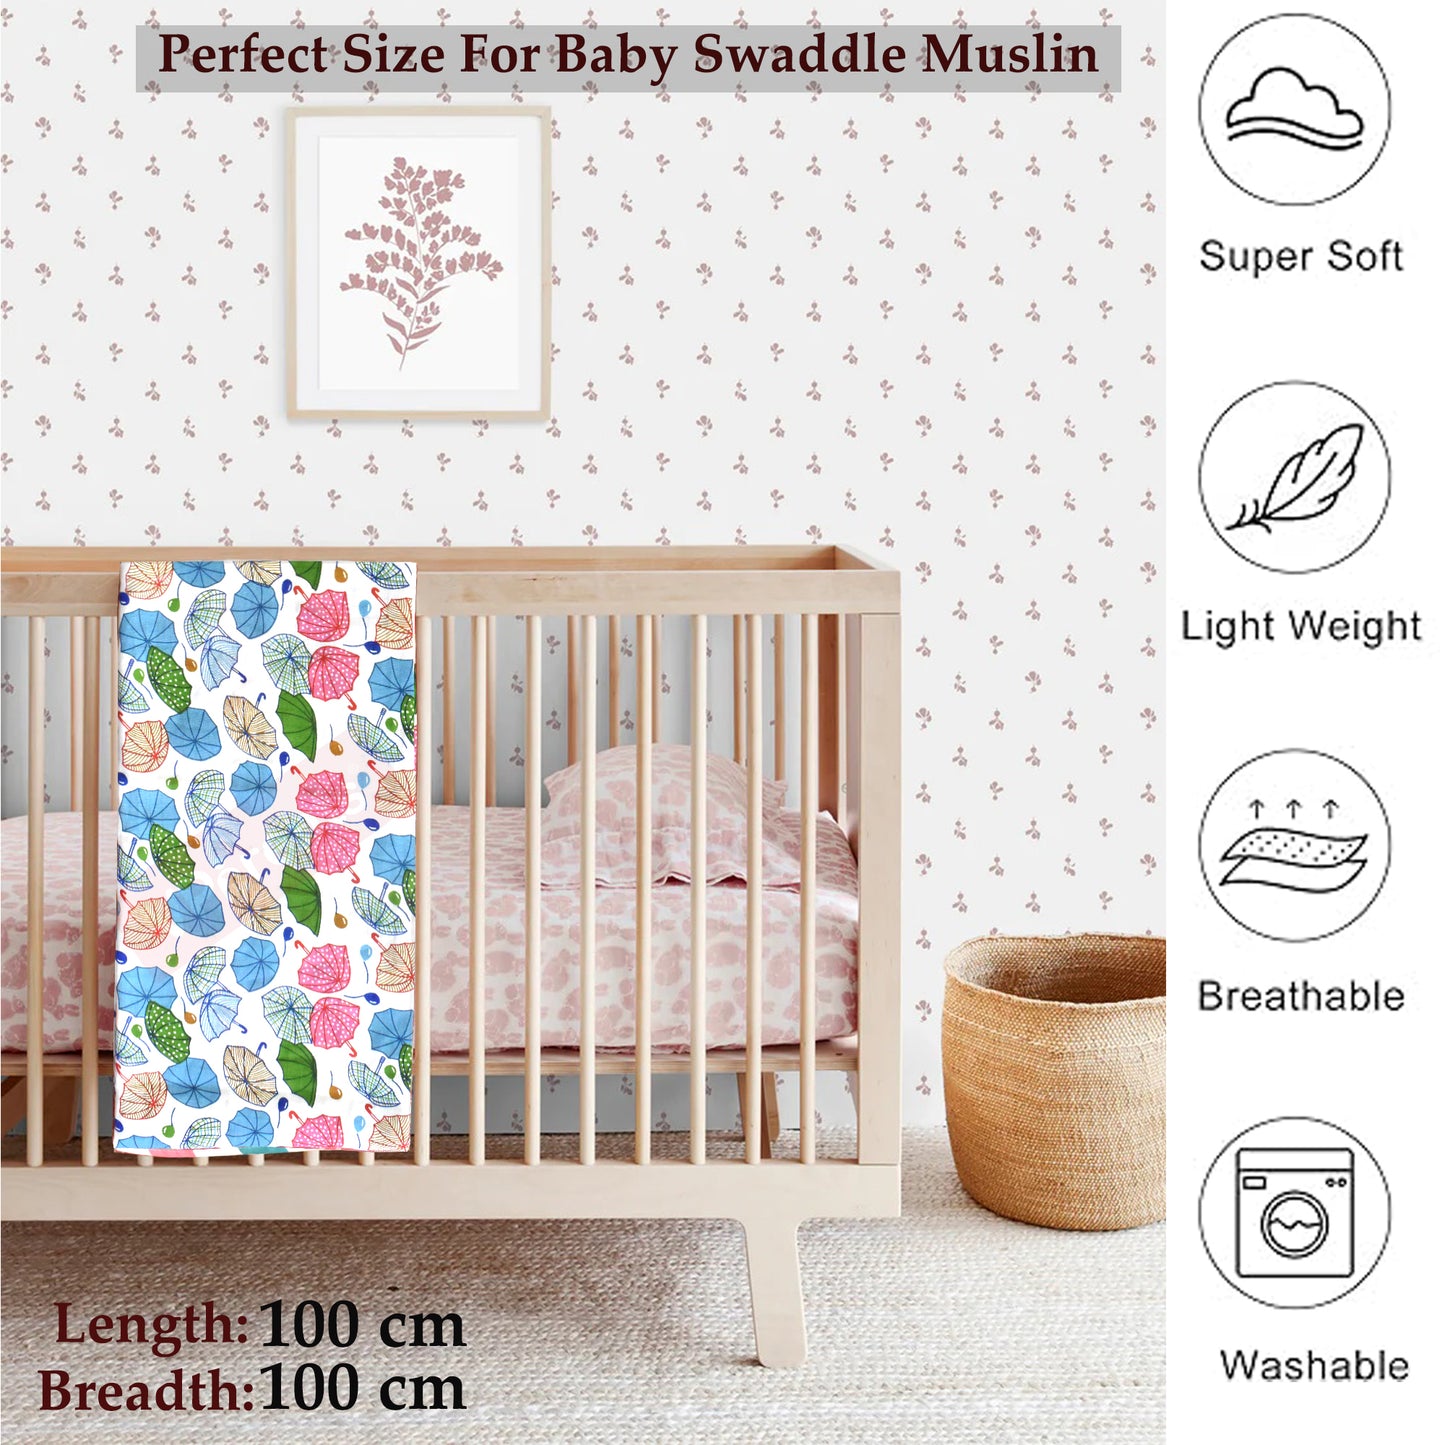 VParents Cotton Muslin Baby Swaddle Set New Born Baby (0-18 Months) Pack of 1 (Umbi)